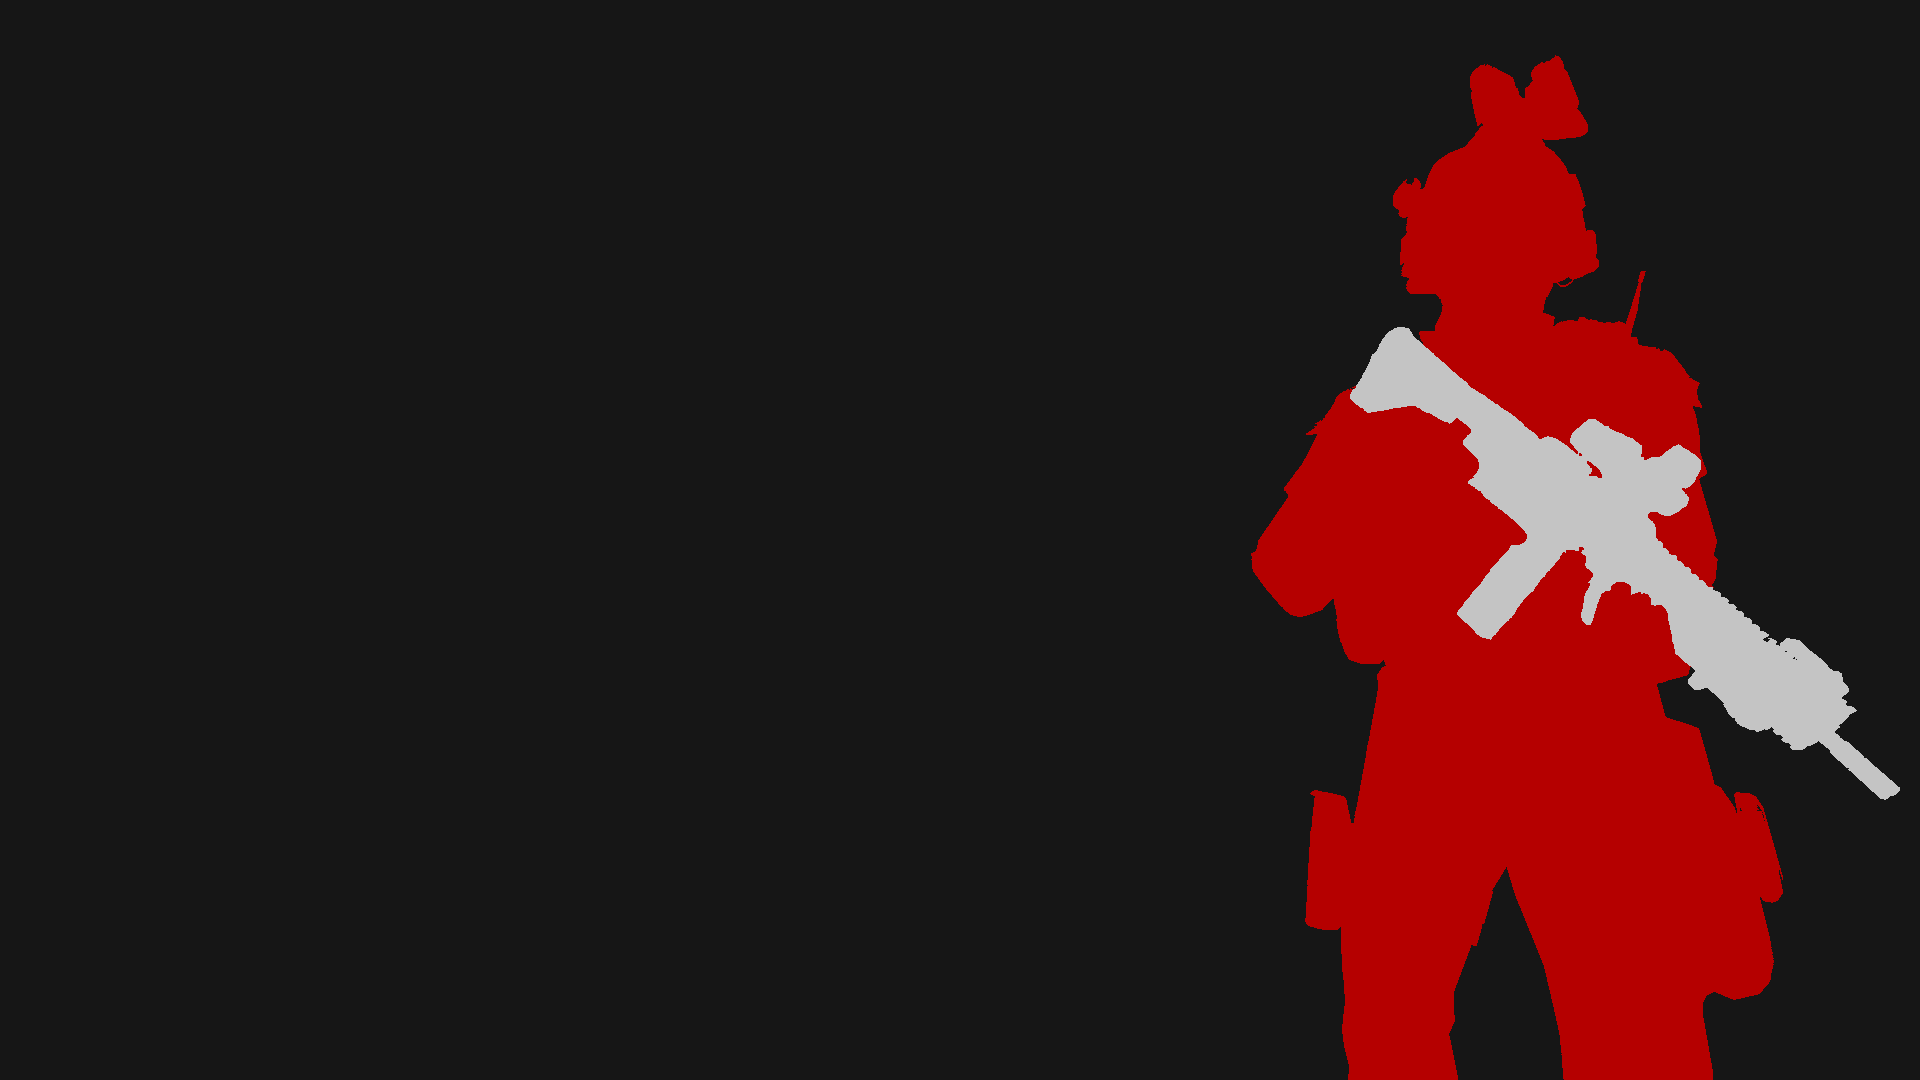 I Made A Arma Wallpaper Or My New Pc Thought Some Of You Might